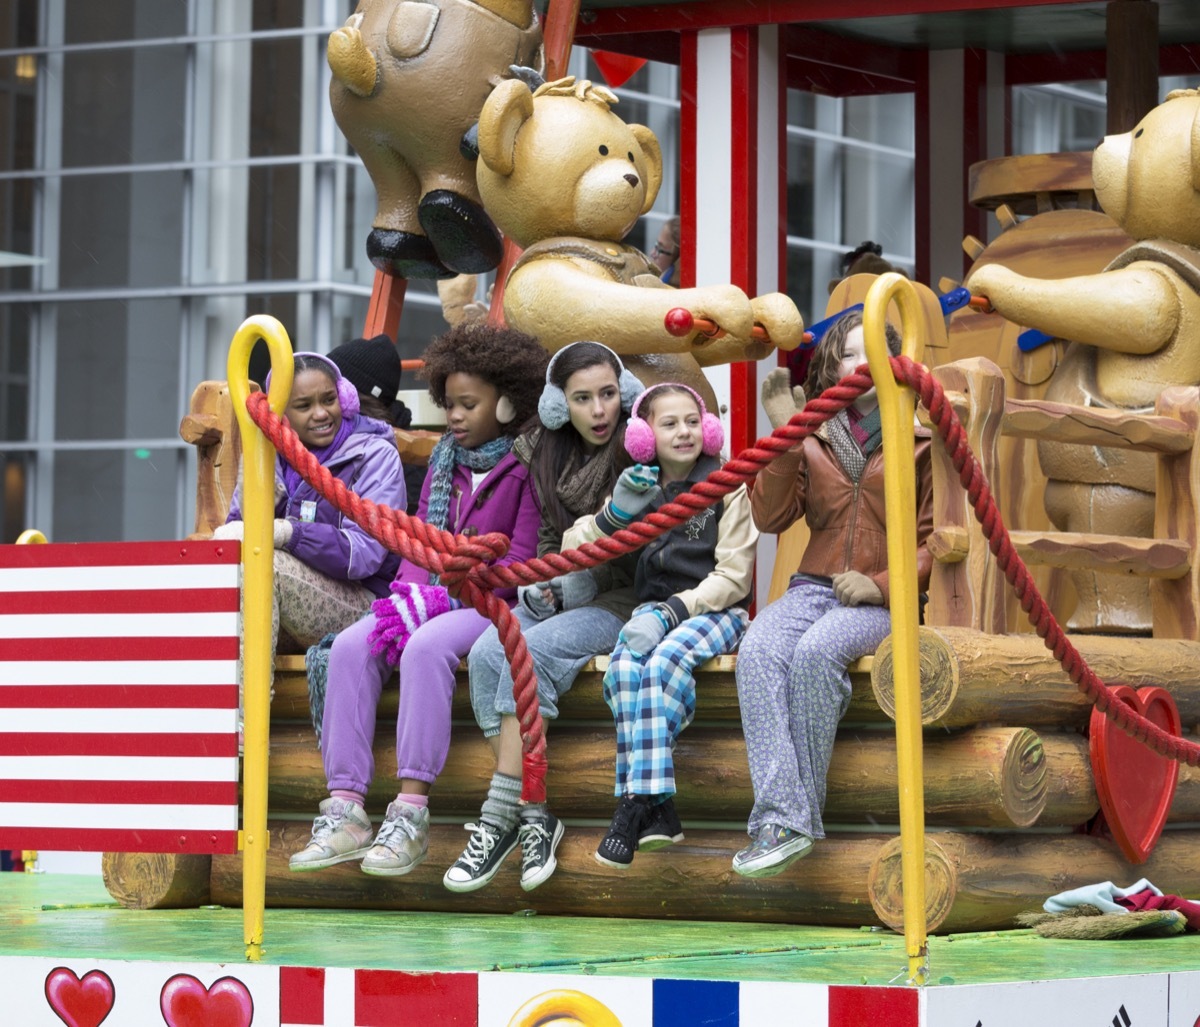 Kids on a float in the Macy's Thanksgiving Day Parade